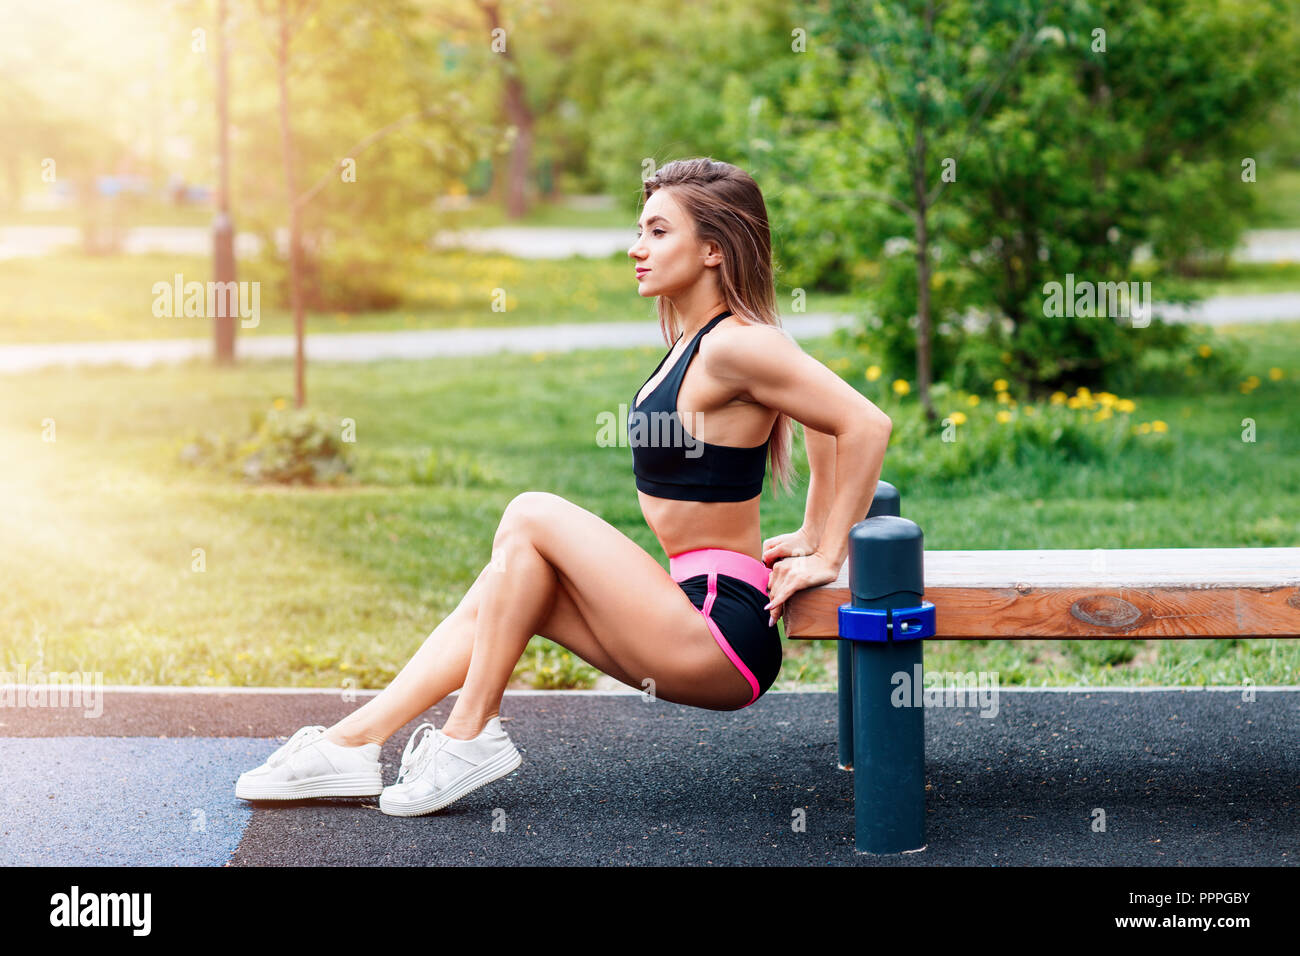 Young sporty woman doing triceps dip exercise on city street bench. Stock Photo